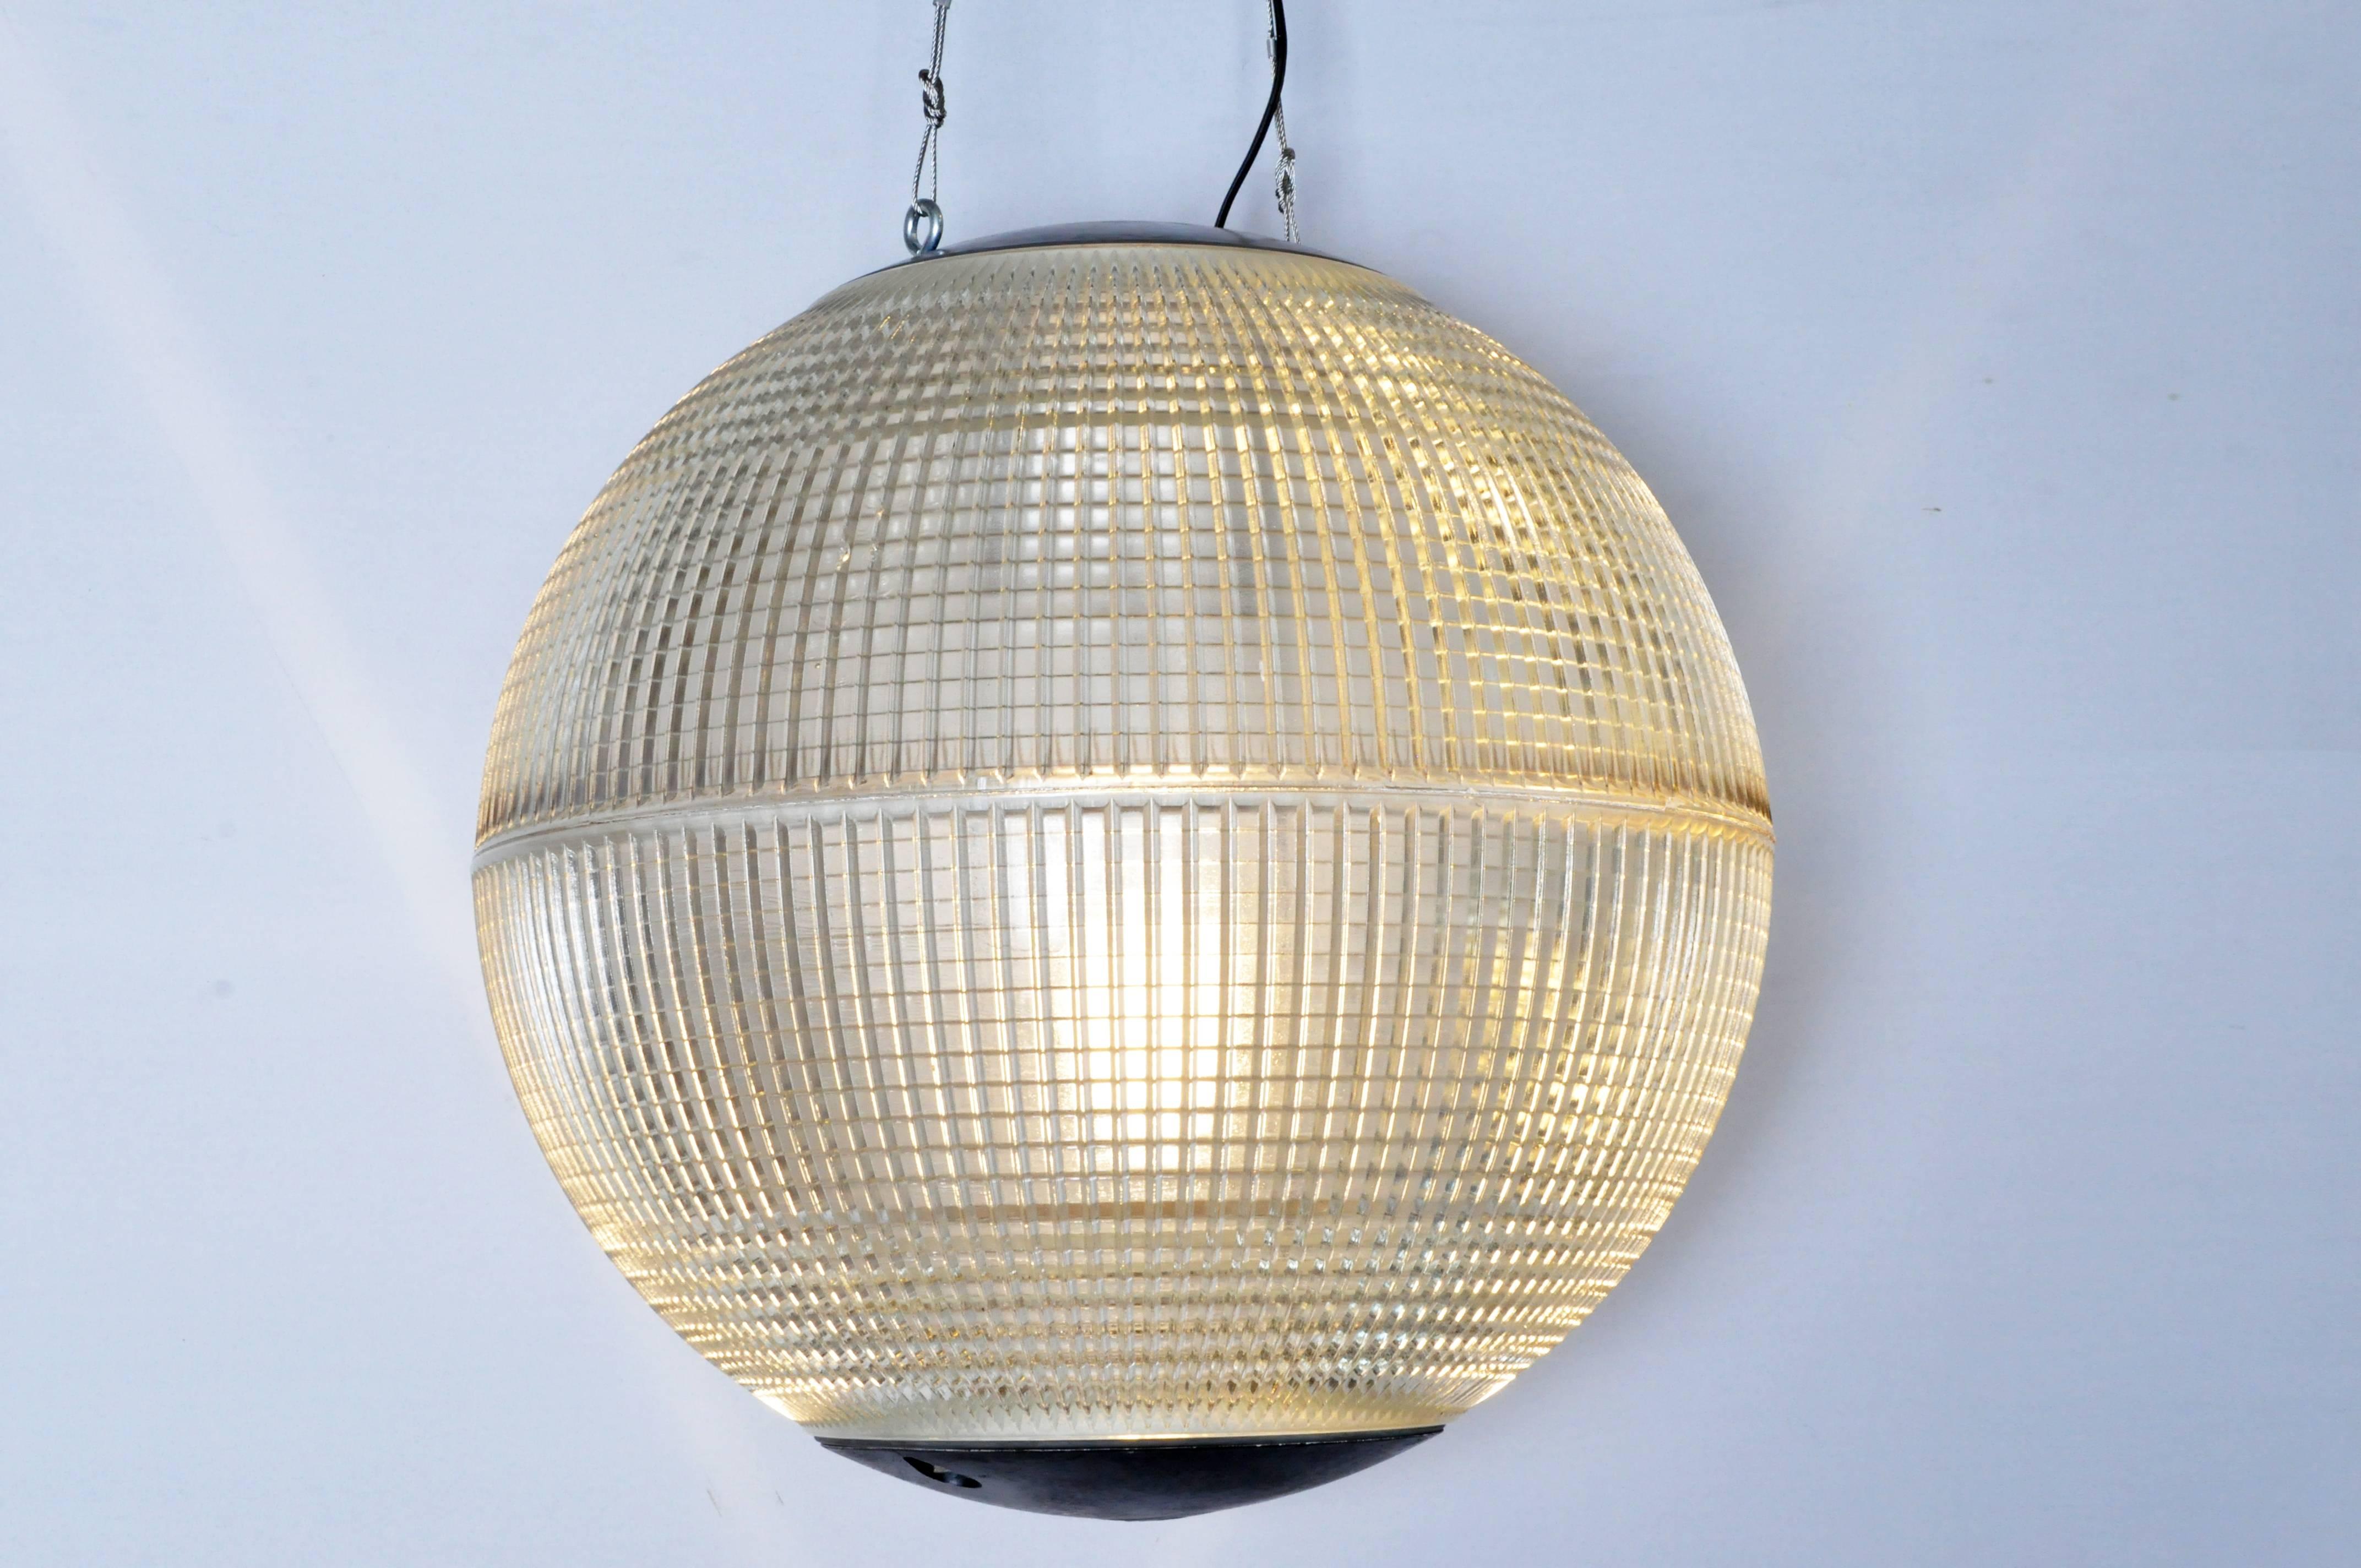 These iconic spheres once lighted the thoroughfares of Paris. Since being removed from their lampposts, these Industrial globes have been rewired for modern, indoor use. They display handsomely, making a statement individually as a table or floor